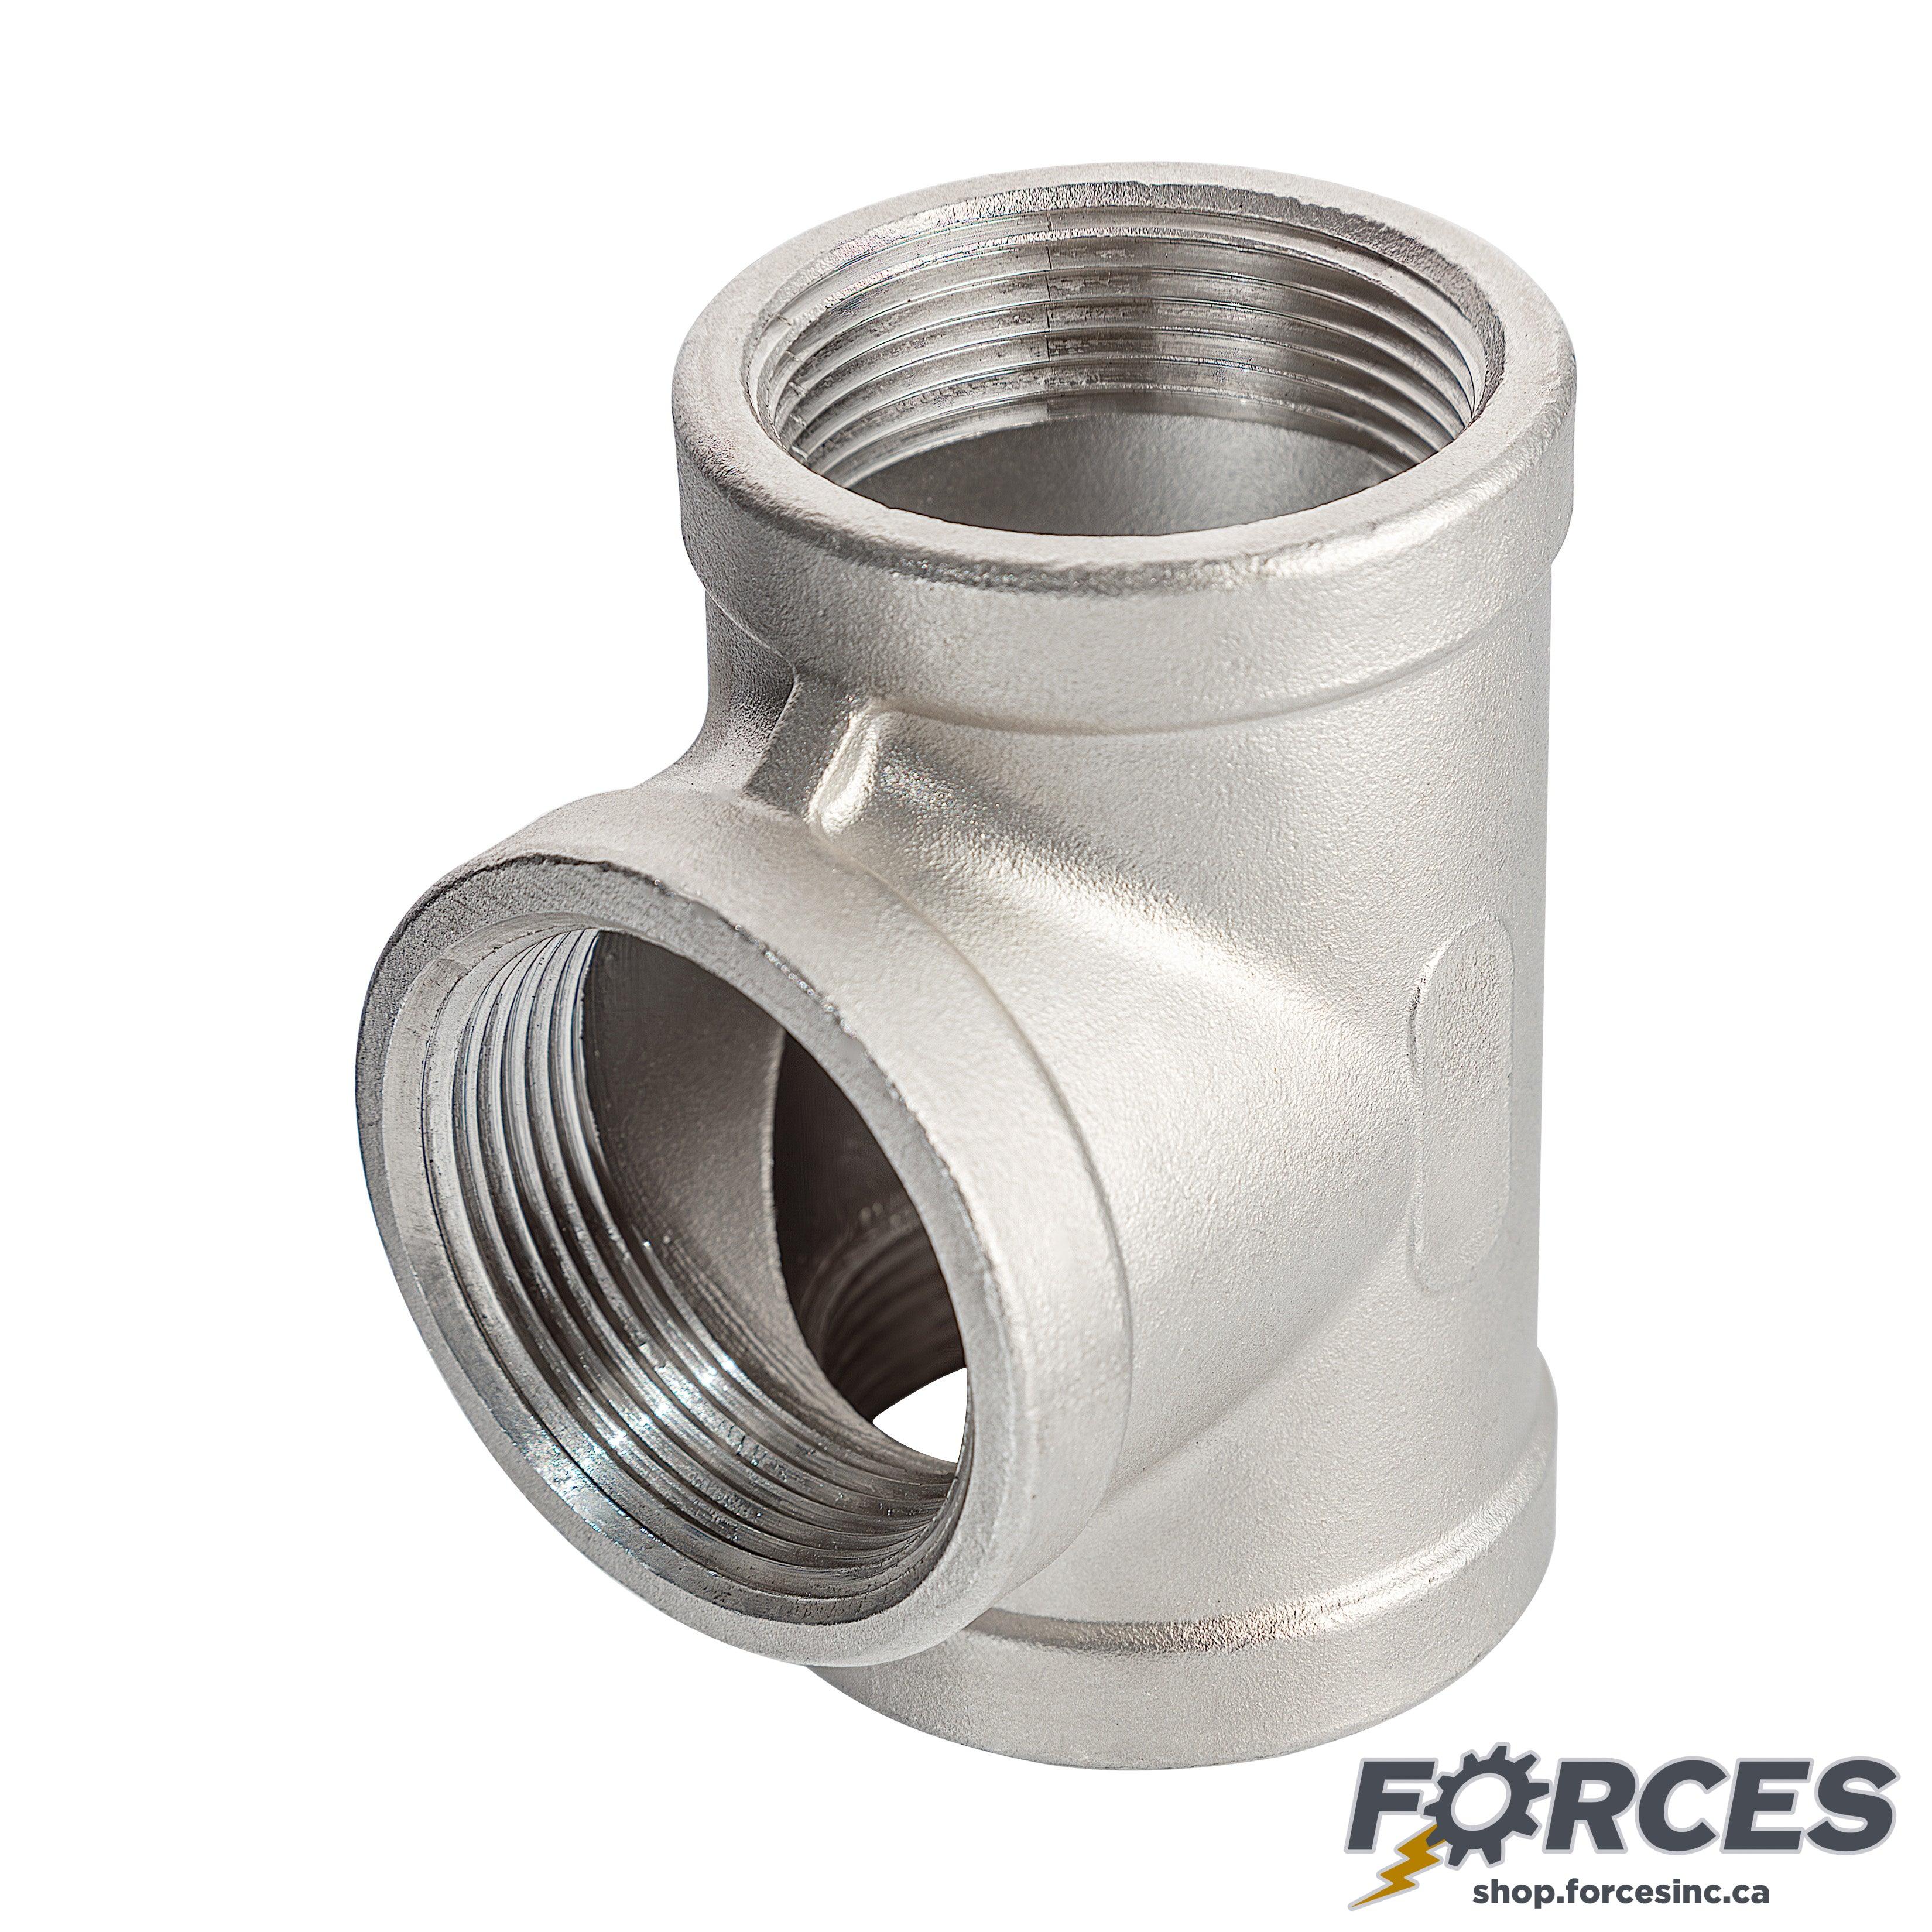 1/2" Tee NPT #150 - Stainless Steel 316 - Forces Inc